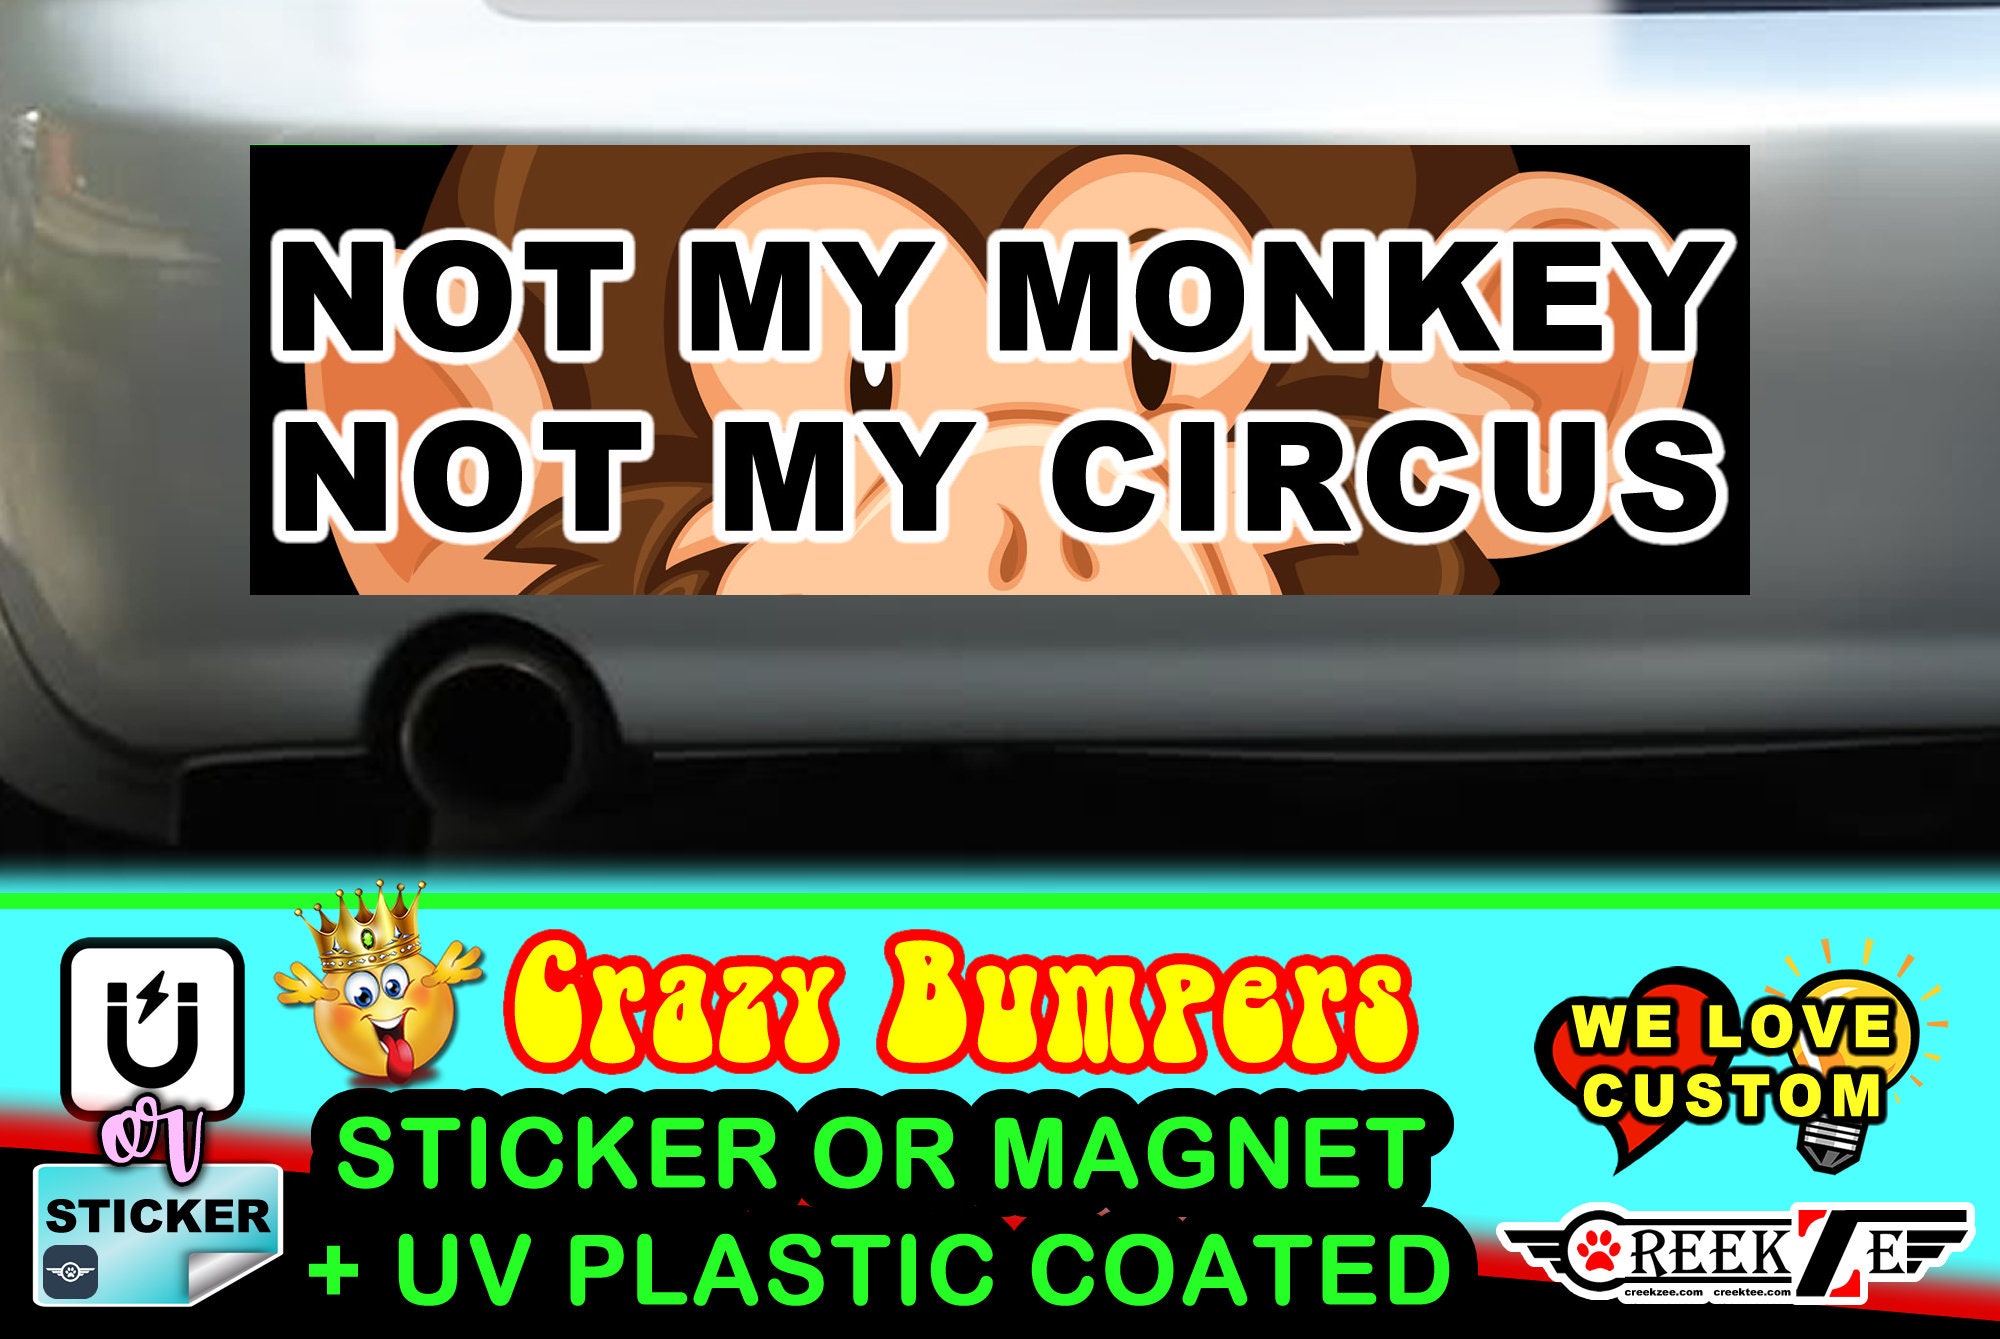 Not My Monkey Not My Circus Funny Bumper Sticker or Magnet, various sizes available with UV laminate protection